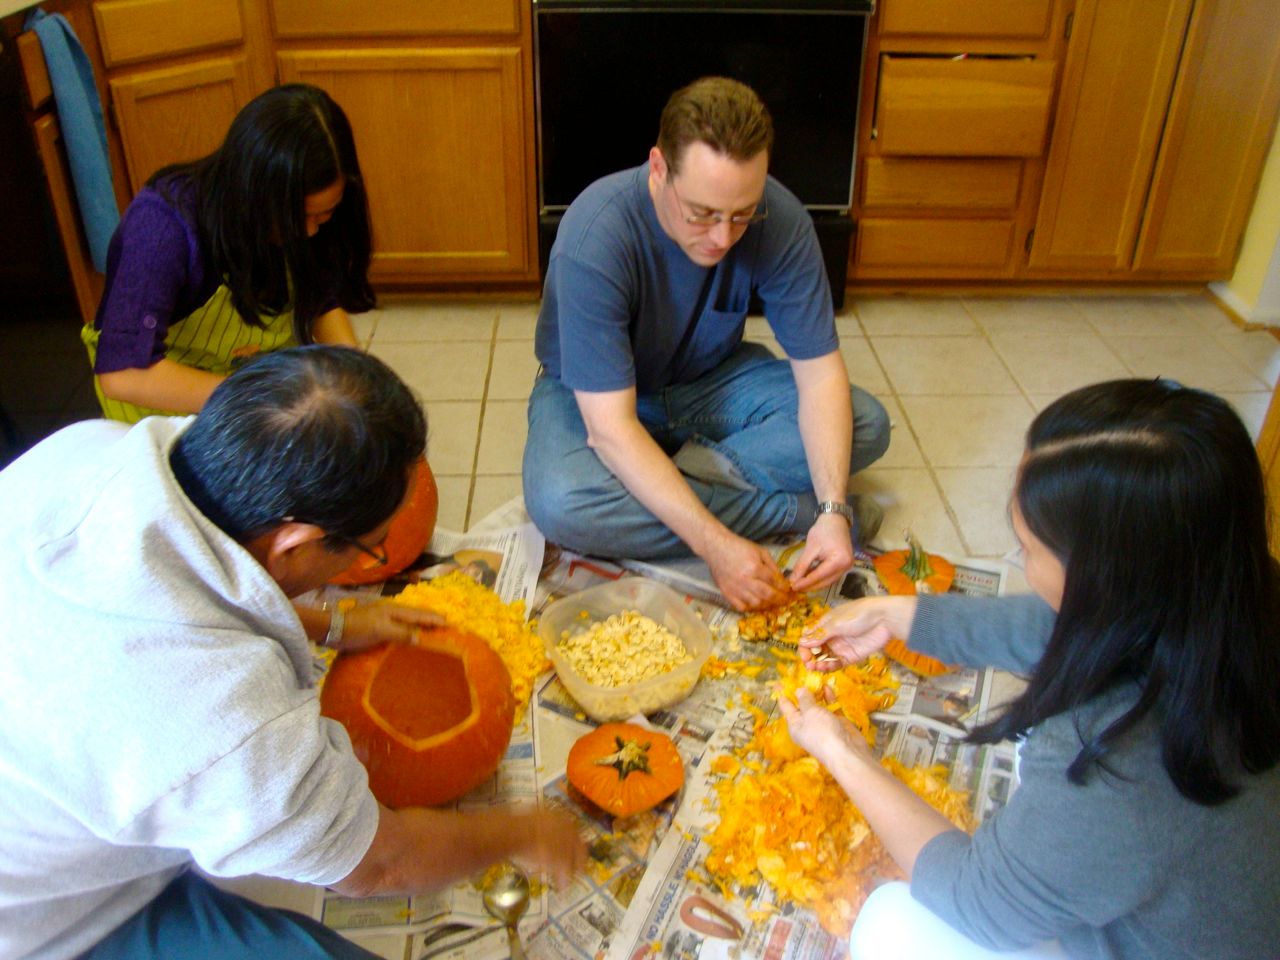  Cleaning out the pumpkins and setting aside the seeds to roast them 